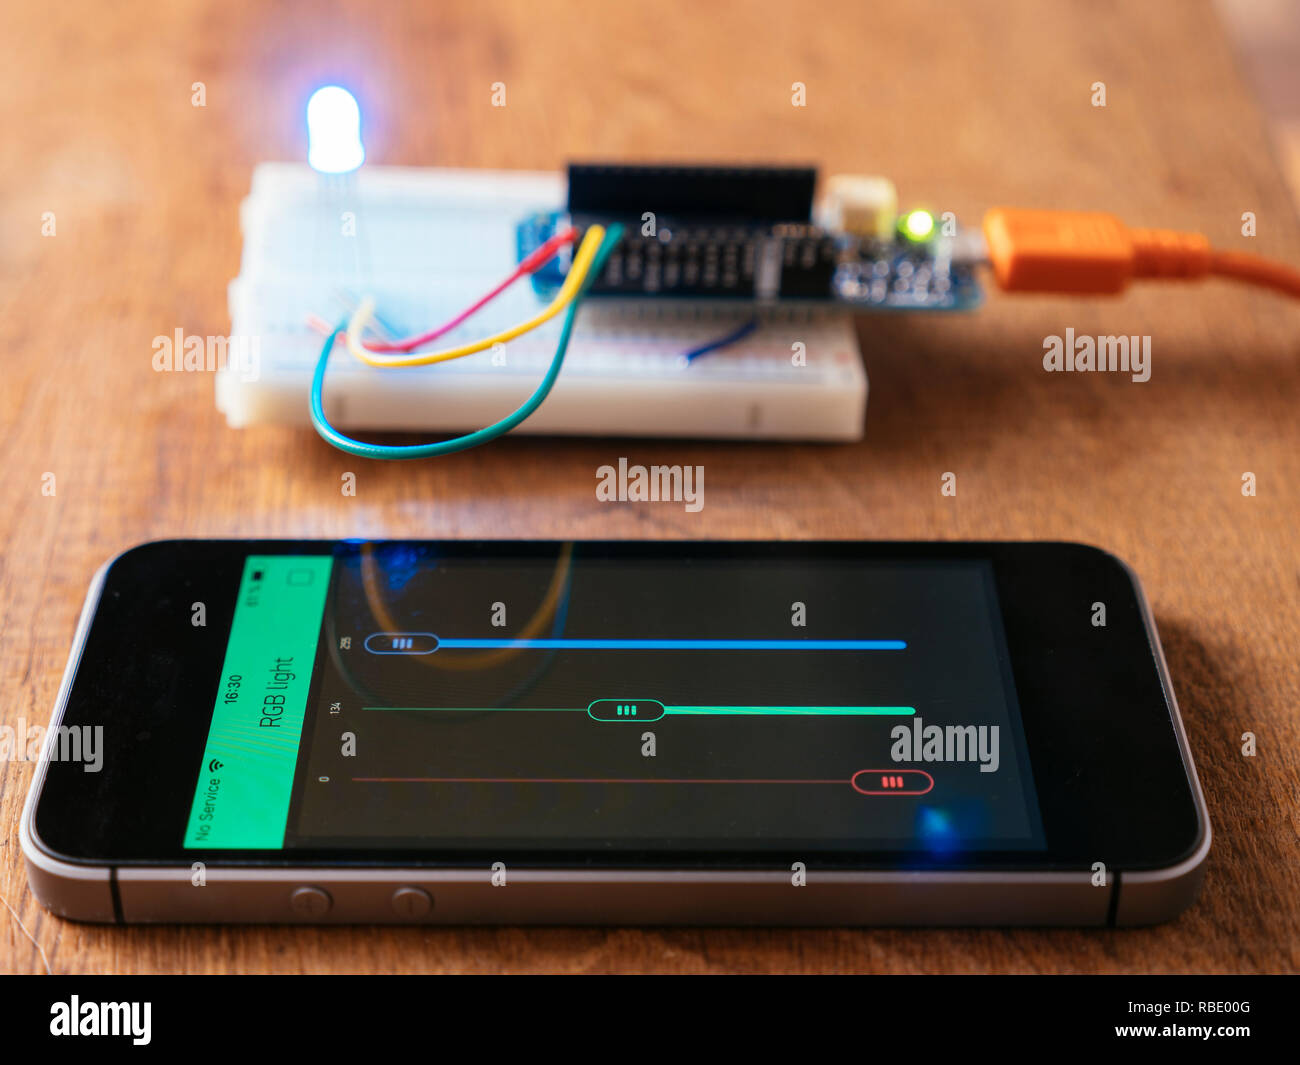 RGB Led on a breadboard with microcontroller board being controlled by a  mobile phone app Stock Photo - Alamy